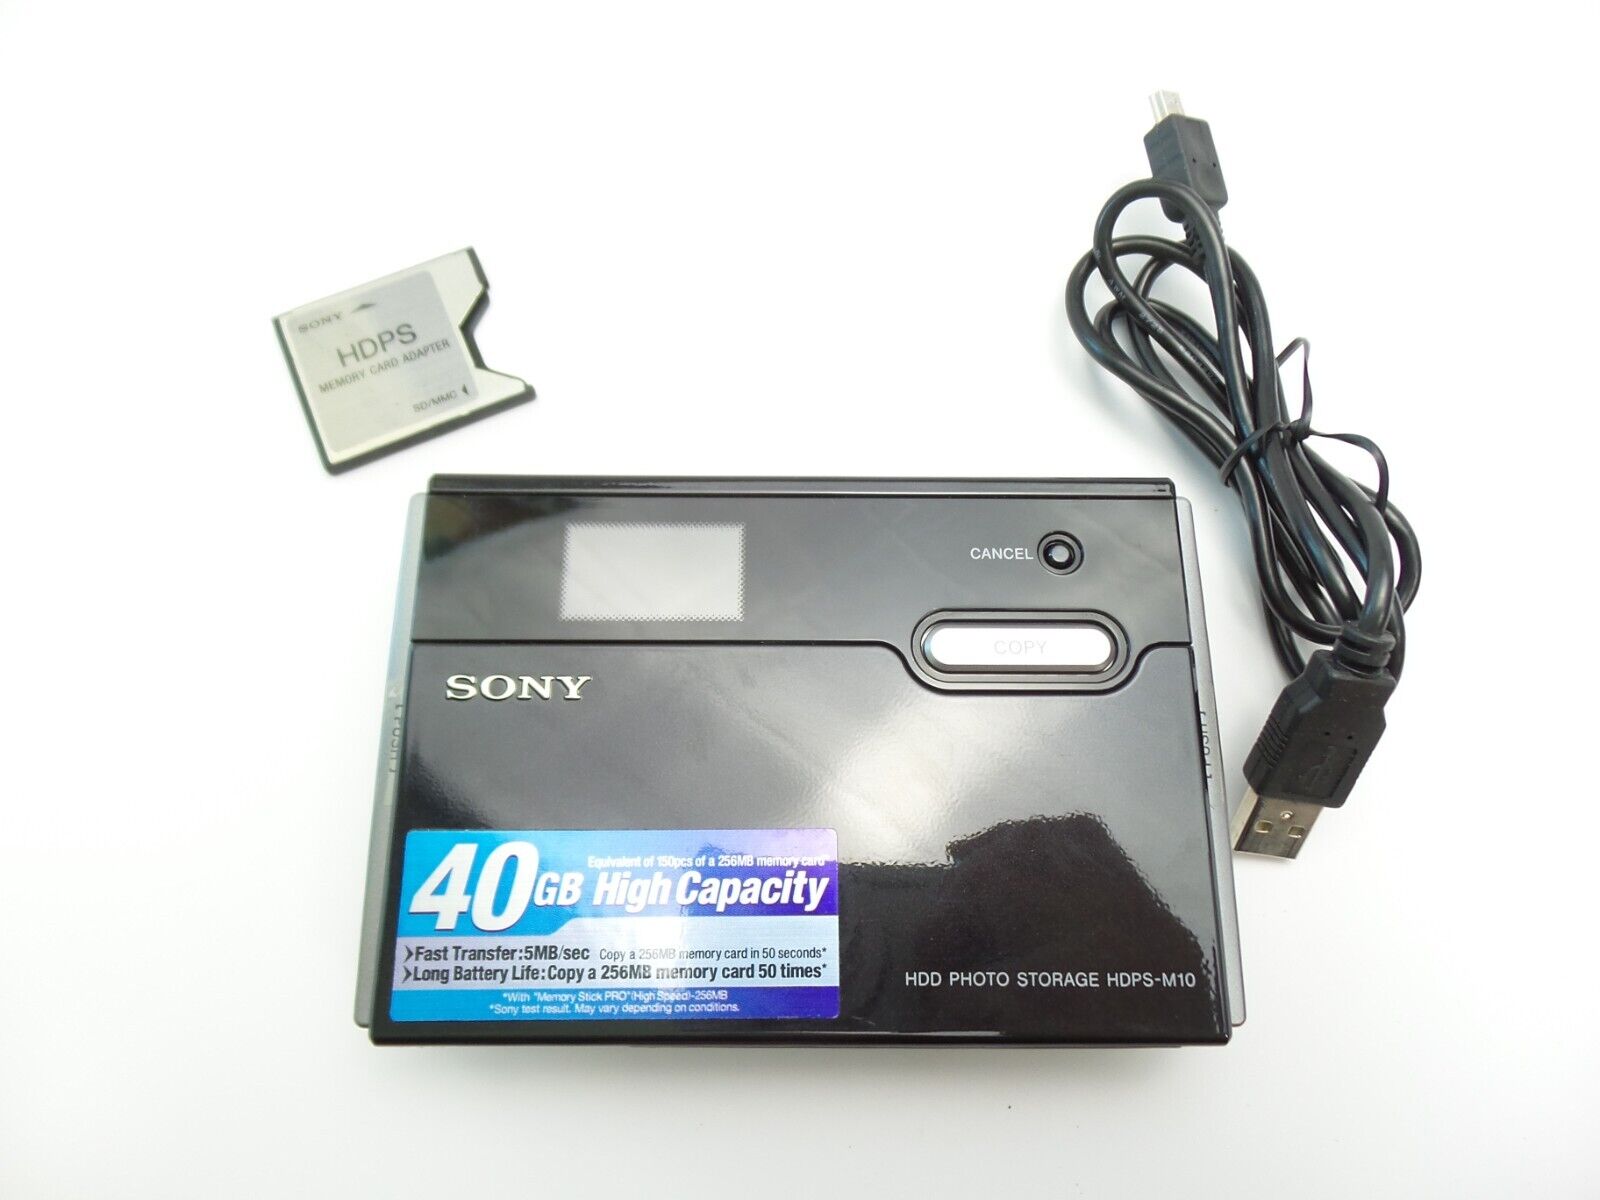 Sony hdps-m10 hdd Portable Photo Storage Drive Compact Flash Reader